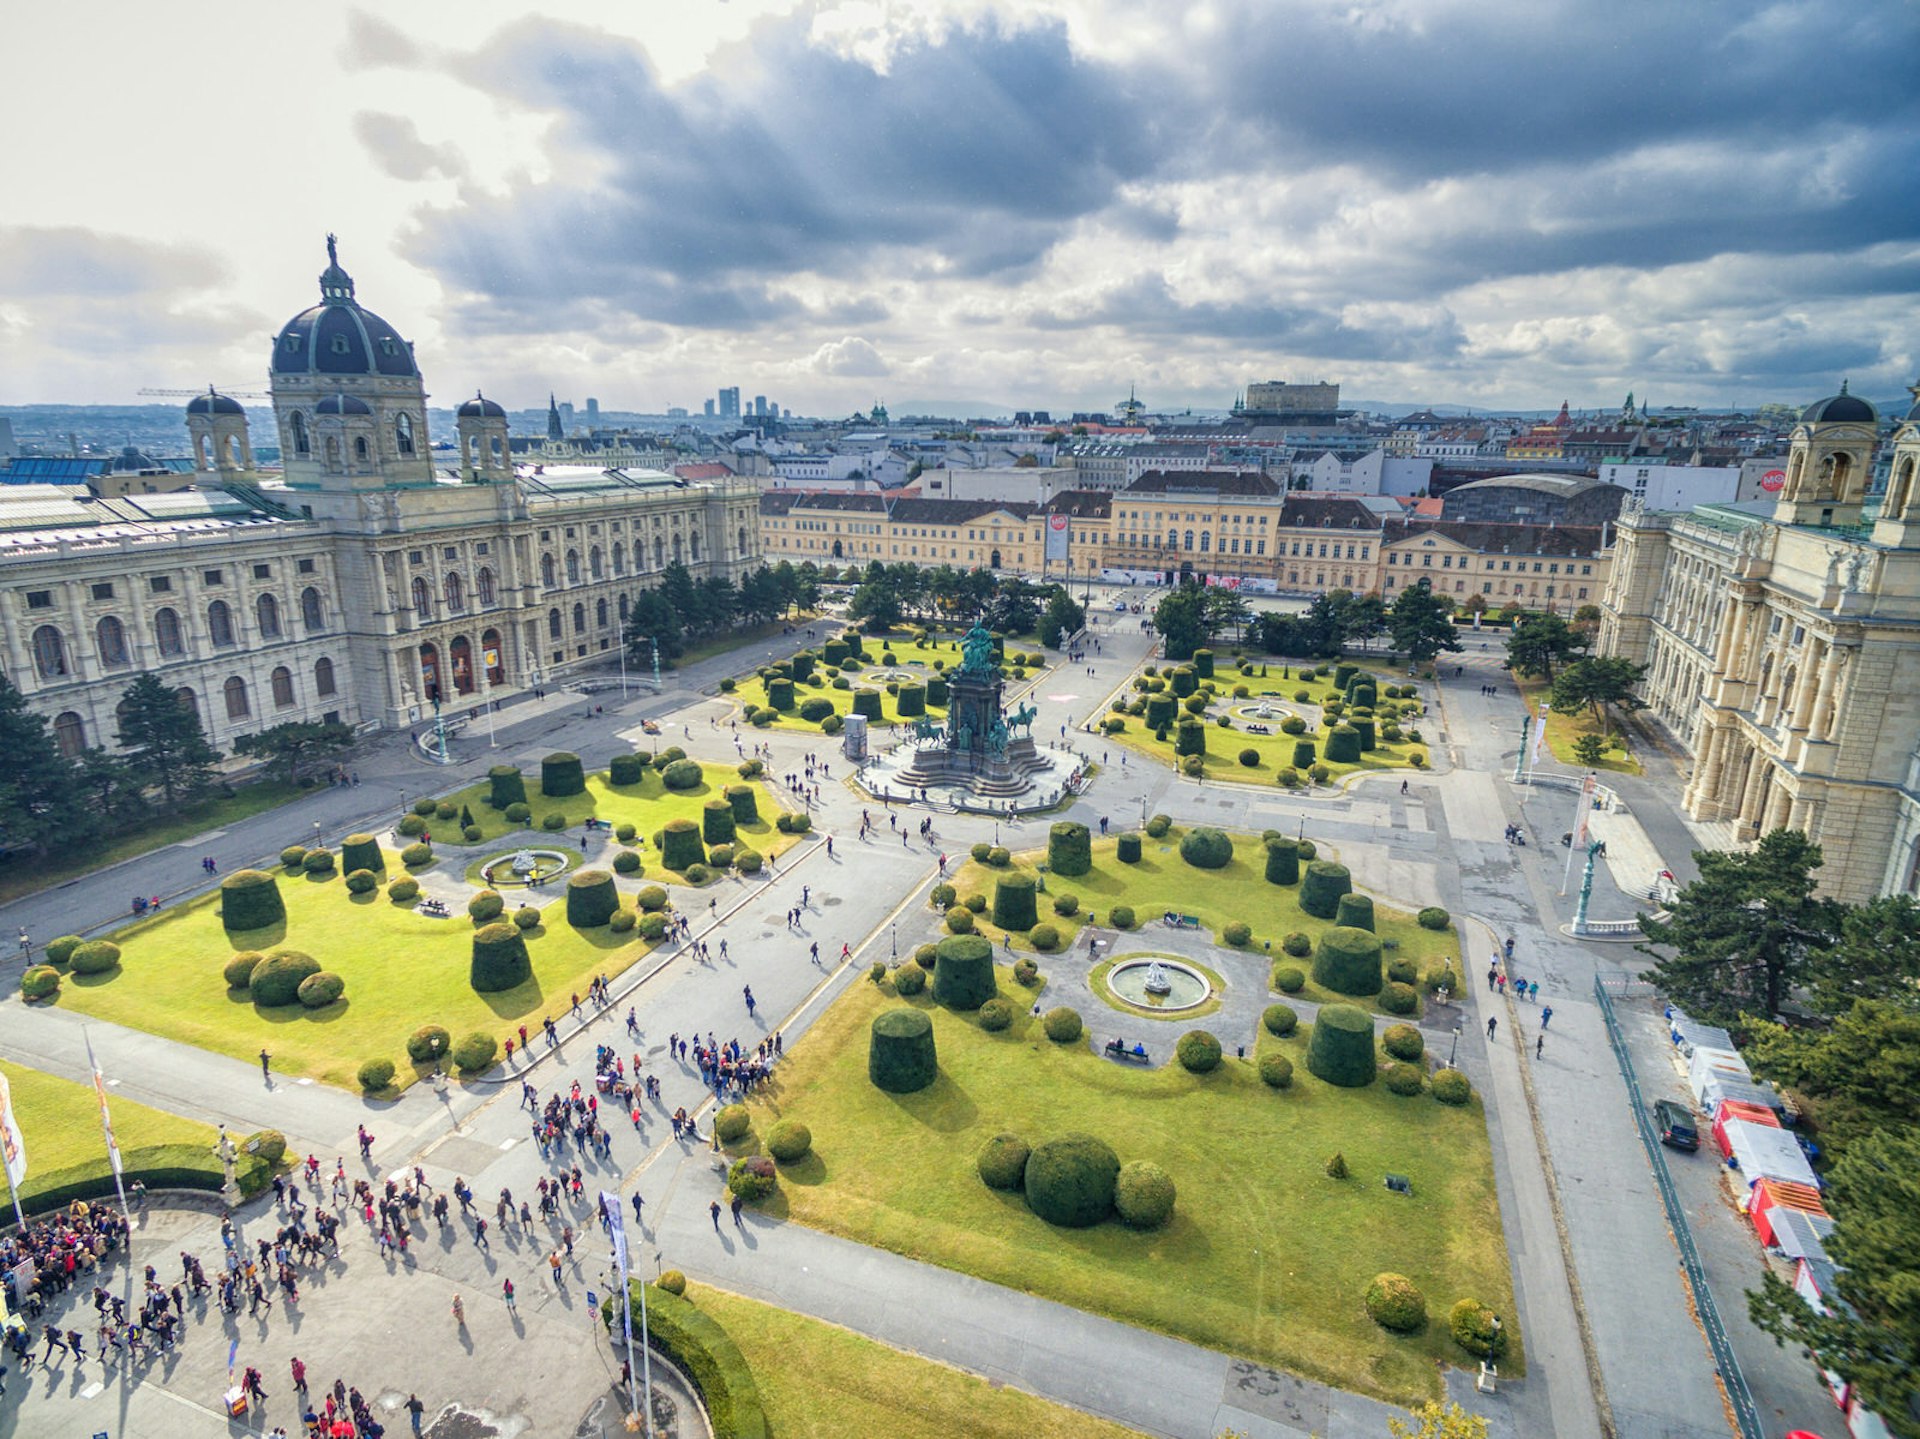 An aerial shot of the large Maria Theresien Platz public square in Vienna, which is filled with people © photosounds / Shutterstock